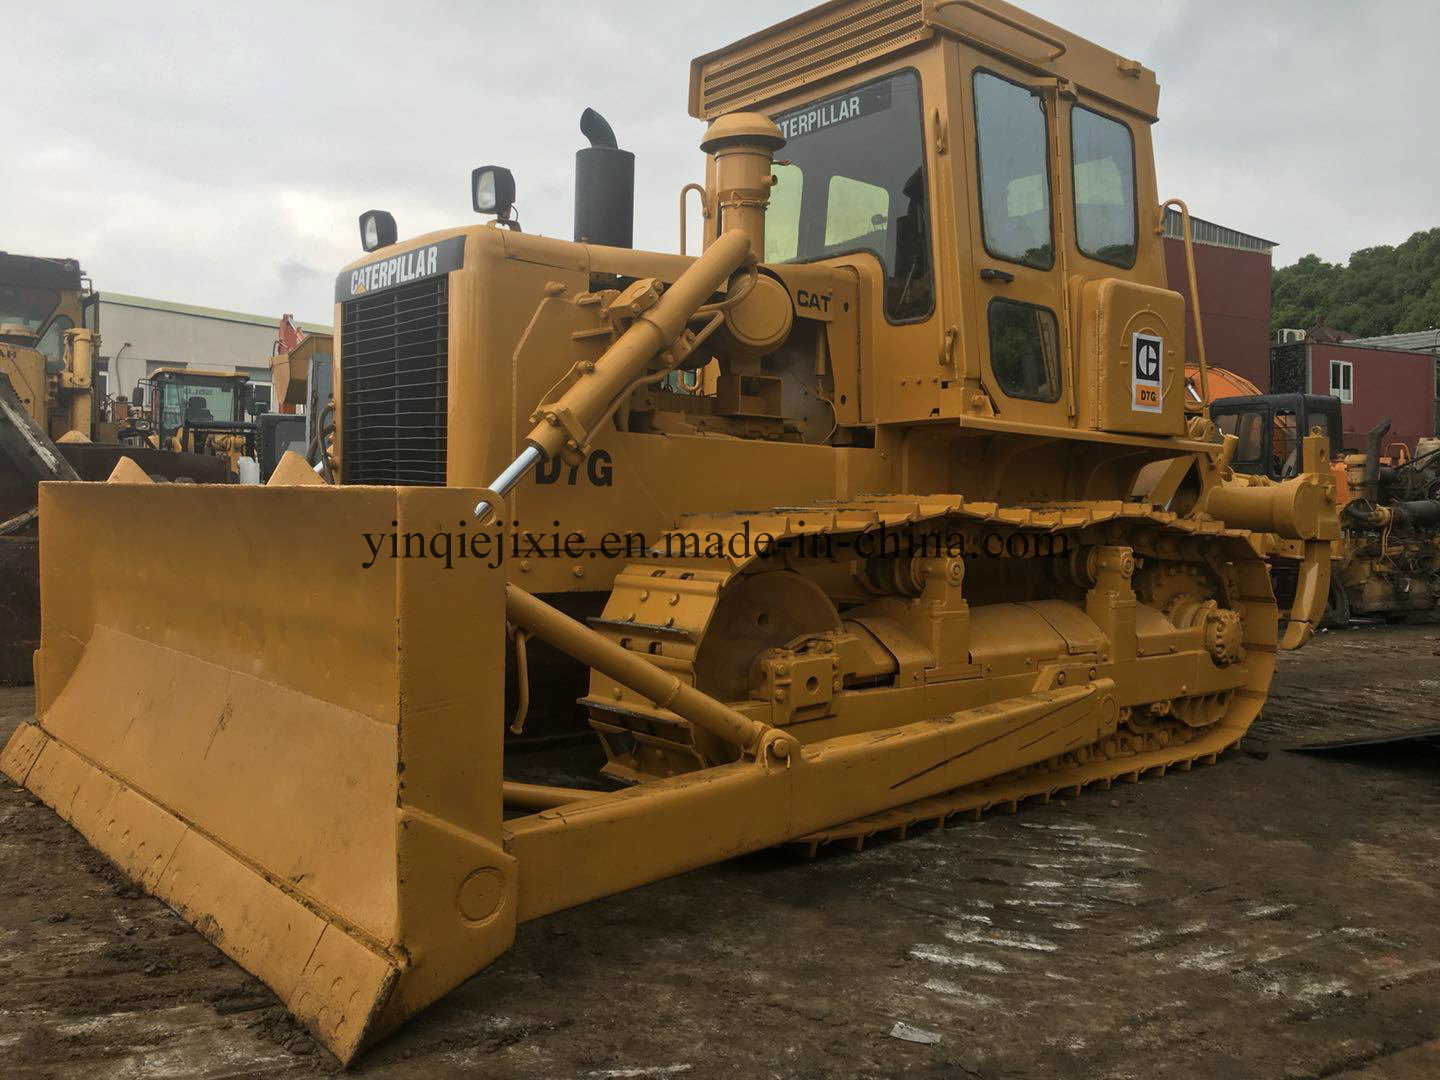 Secondhand D7g Bullodzer, Used D5/D3/D4/D6/D7r/D8/D9 Dozer for Sale